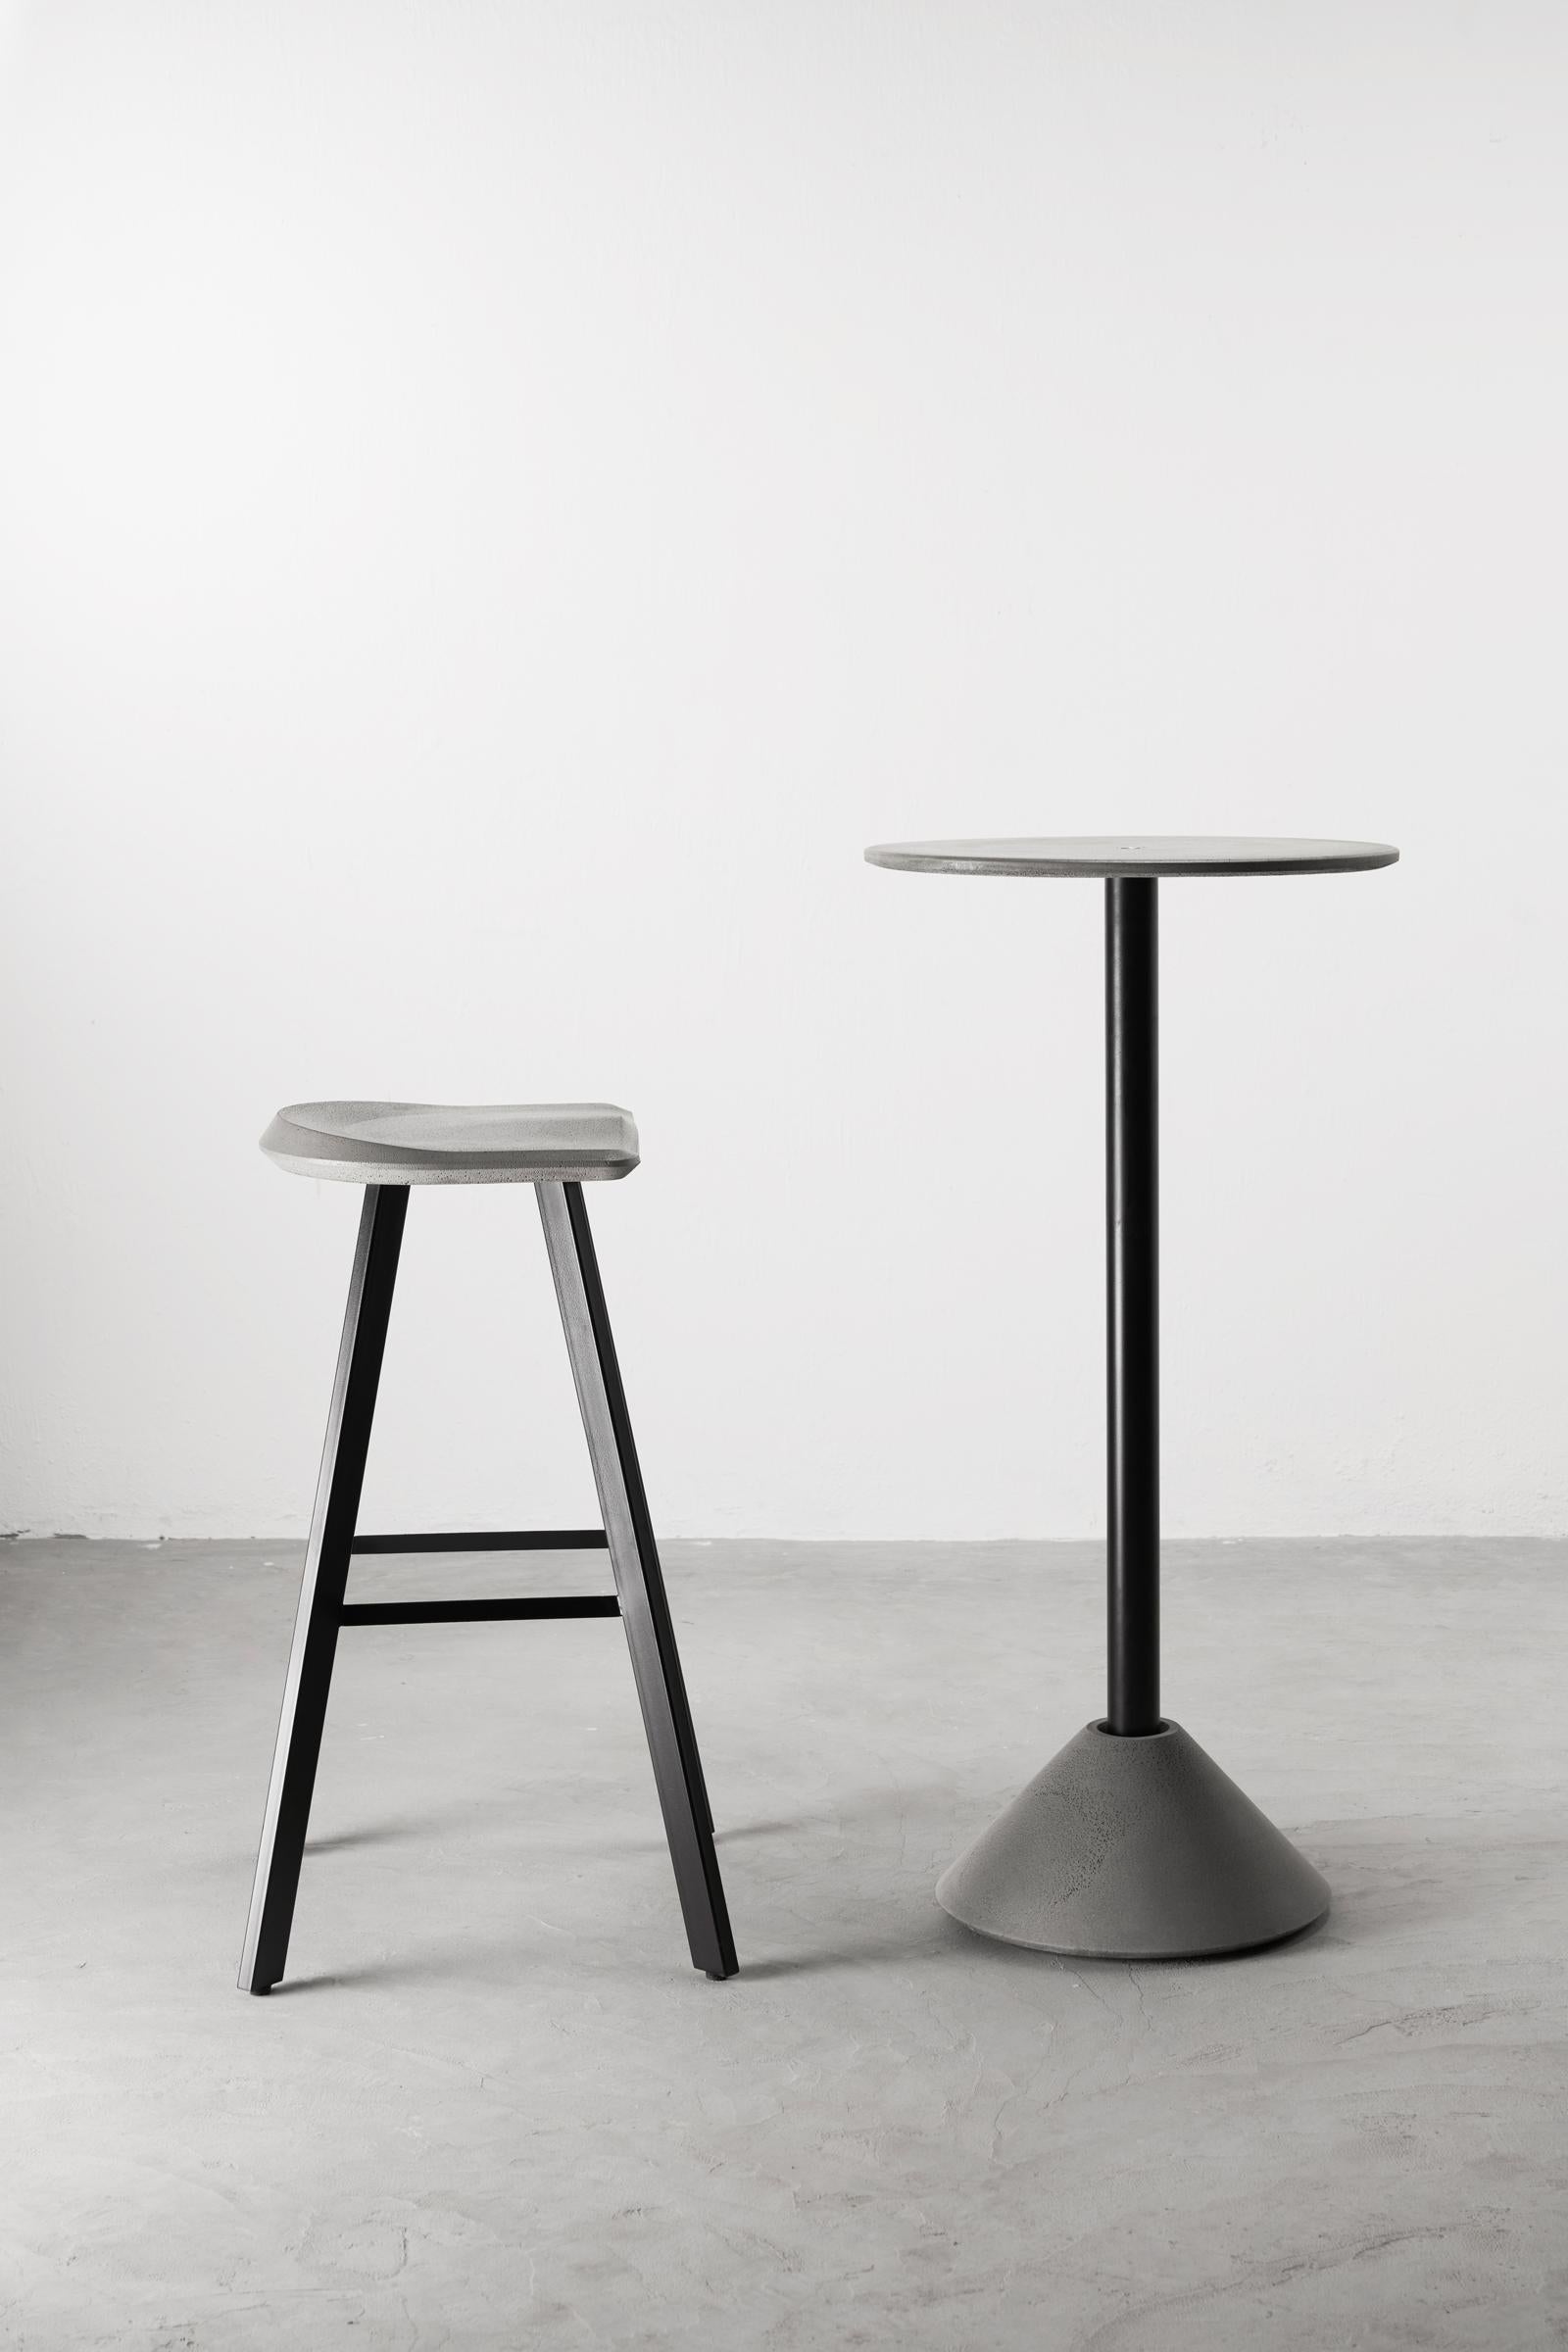 'DING' is a collection of tables: coffee / side tables, dining tables, bar tables. 
The base is in concrete and the structure and to top in aluminum (black or white).
by Bentu design

Tabletop and structure: Aluminum
Table base: Concrete

5